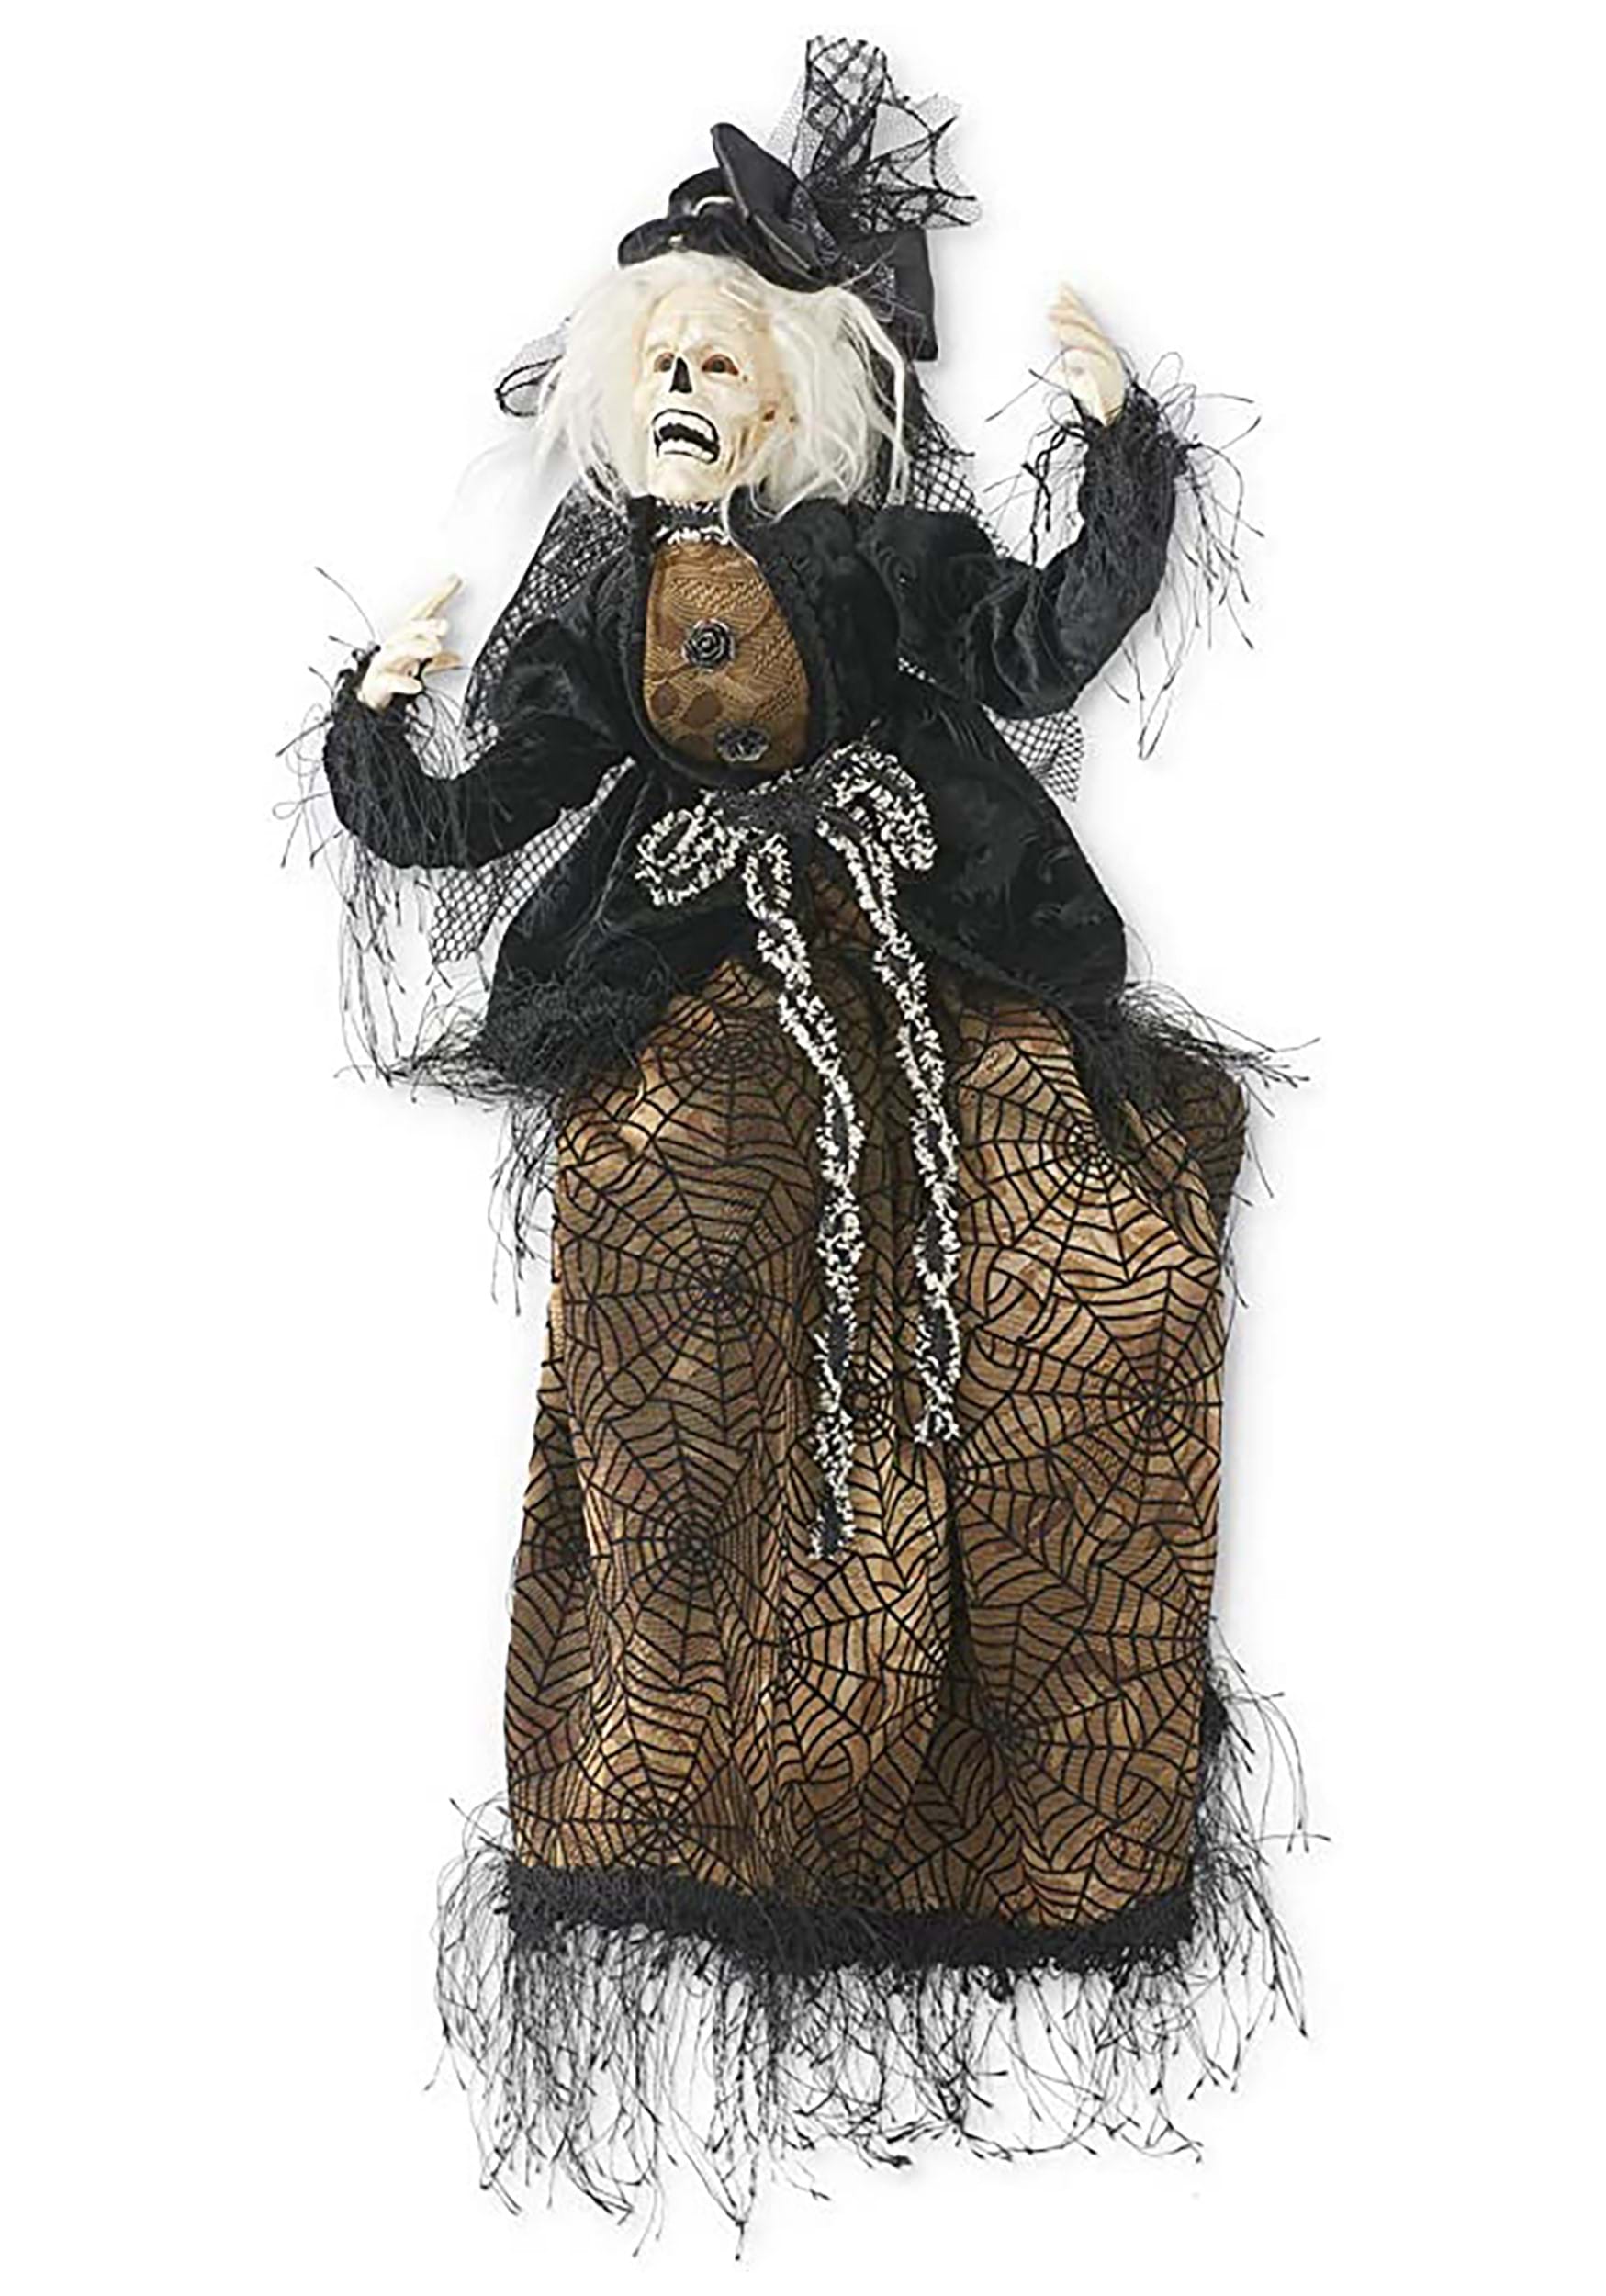 Image of 25-Inch Posable Sitting Zombie Lady Halloween Prop | Zombie Decorations ID KK41450B-ST